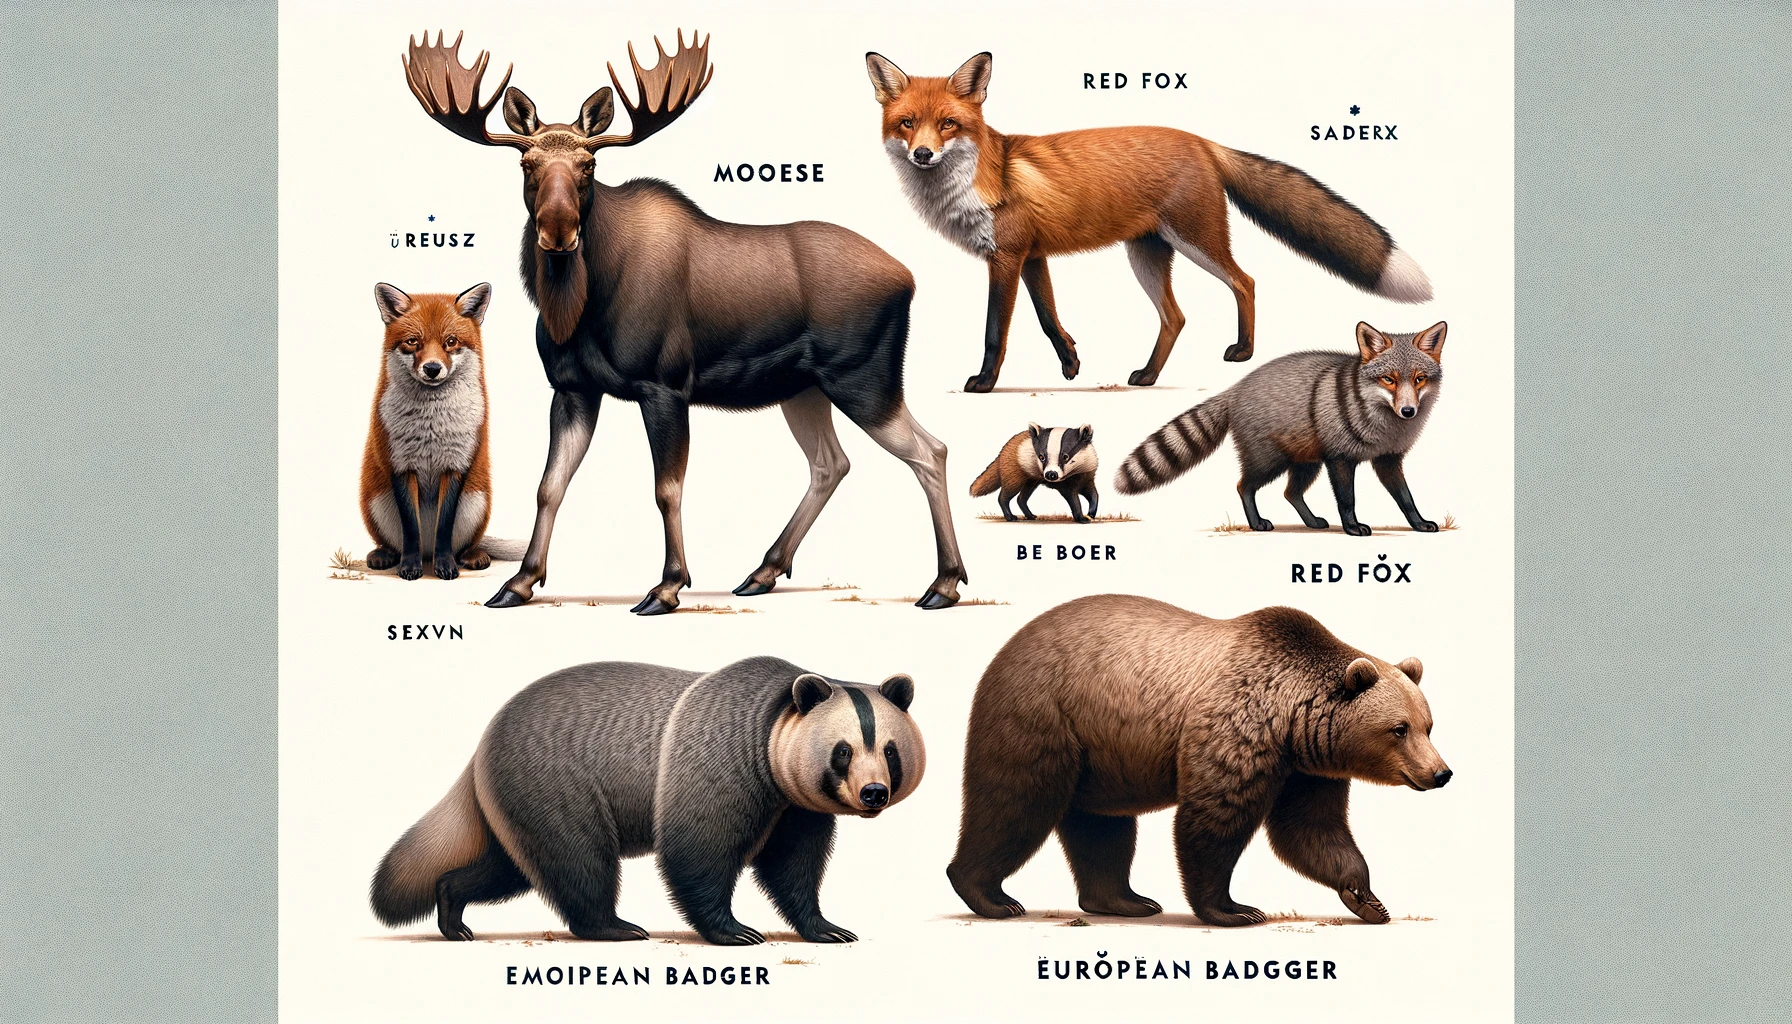 A moose labeled "mooese", a fox labeled "red fox" and "saderx" and another labeled "ureusz" (there is an umault on the u). Another red fox (but grey with a striped tail) is labeled "red fox" and the o has an umlaut. There's a grey bear with a long luxurious bushy tail, a black stripe on its forehead, and panda eyes labeled "emoipean badger". And a pretty normal-looking brown bear labeled "European badgger" with umlauts on two of the e's and one of the o's.